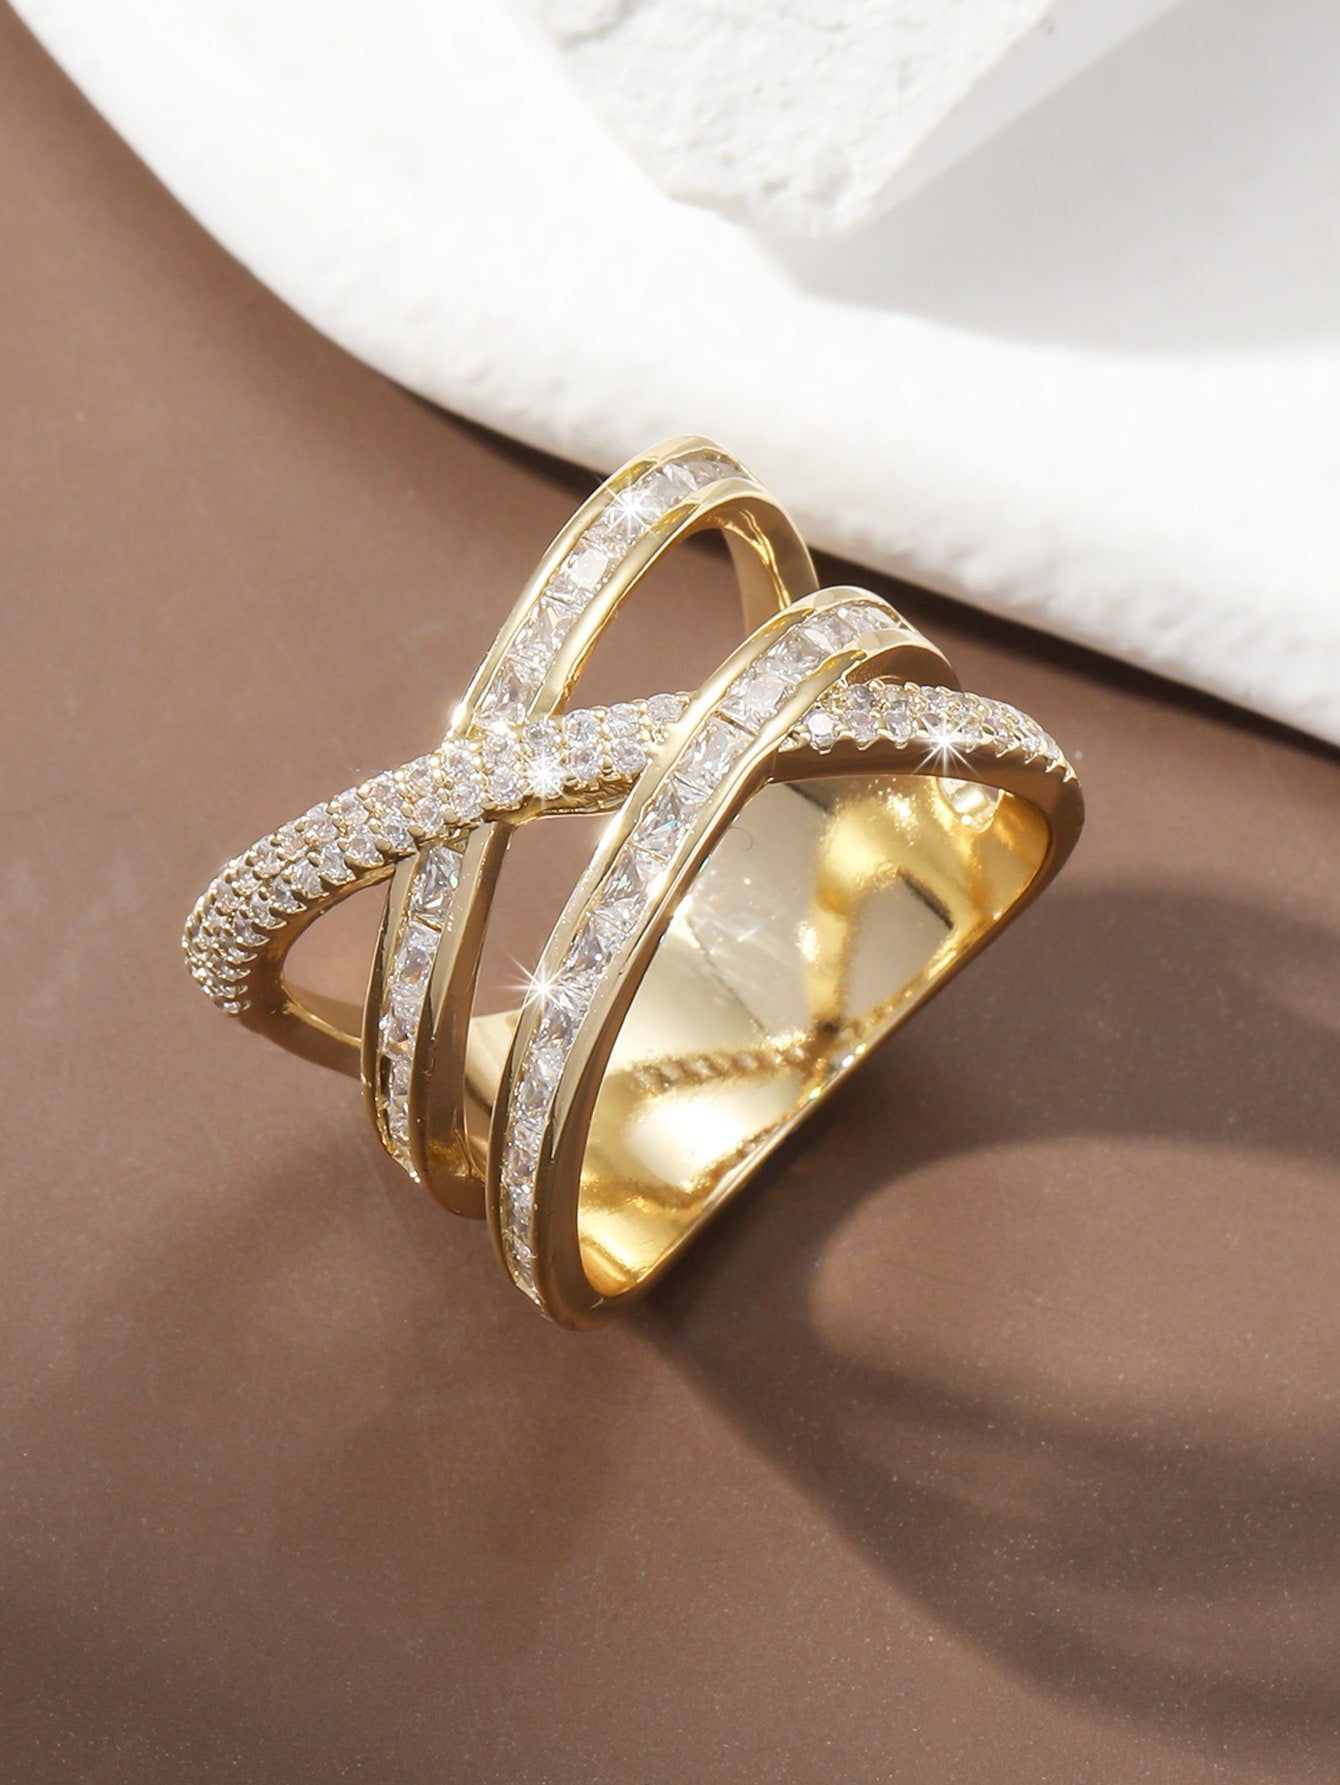 1pc Luxury Cubic Zirconia Criss Cross Design Ring For Women For Gift For Party Banquet Wedding